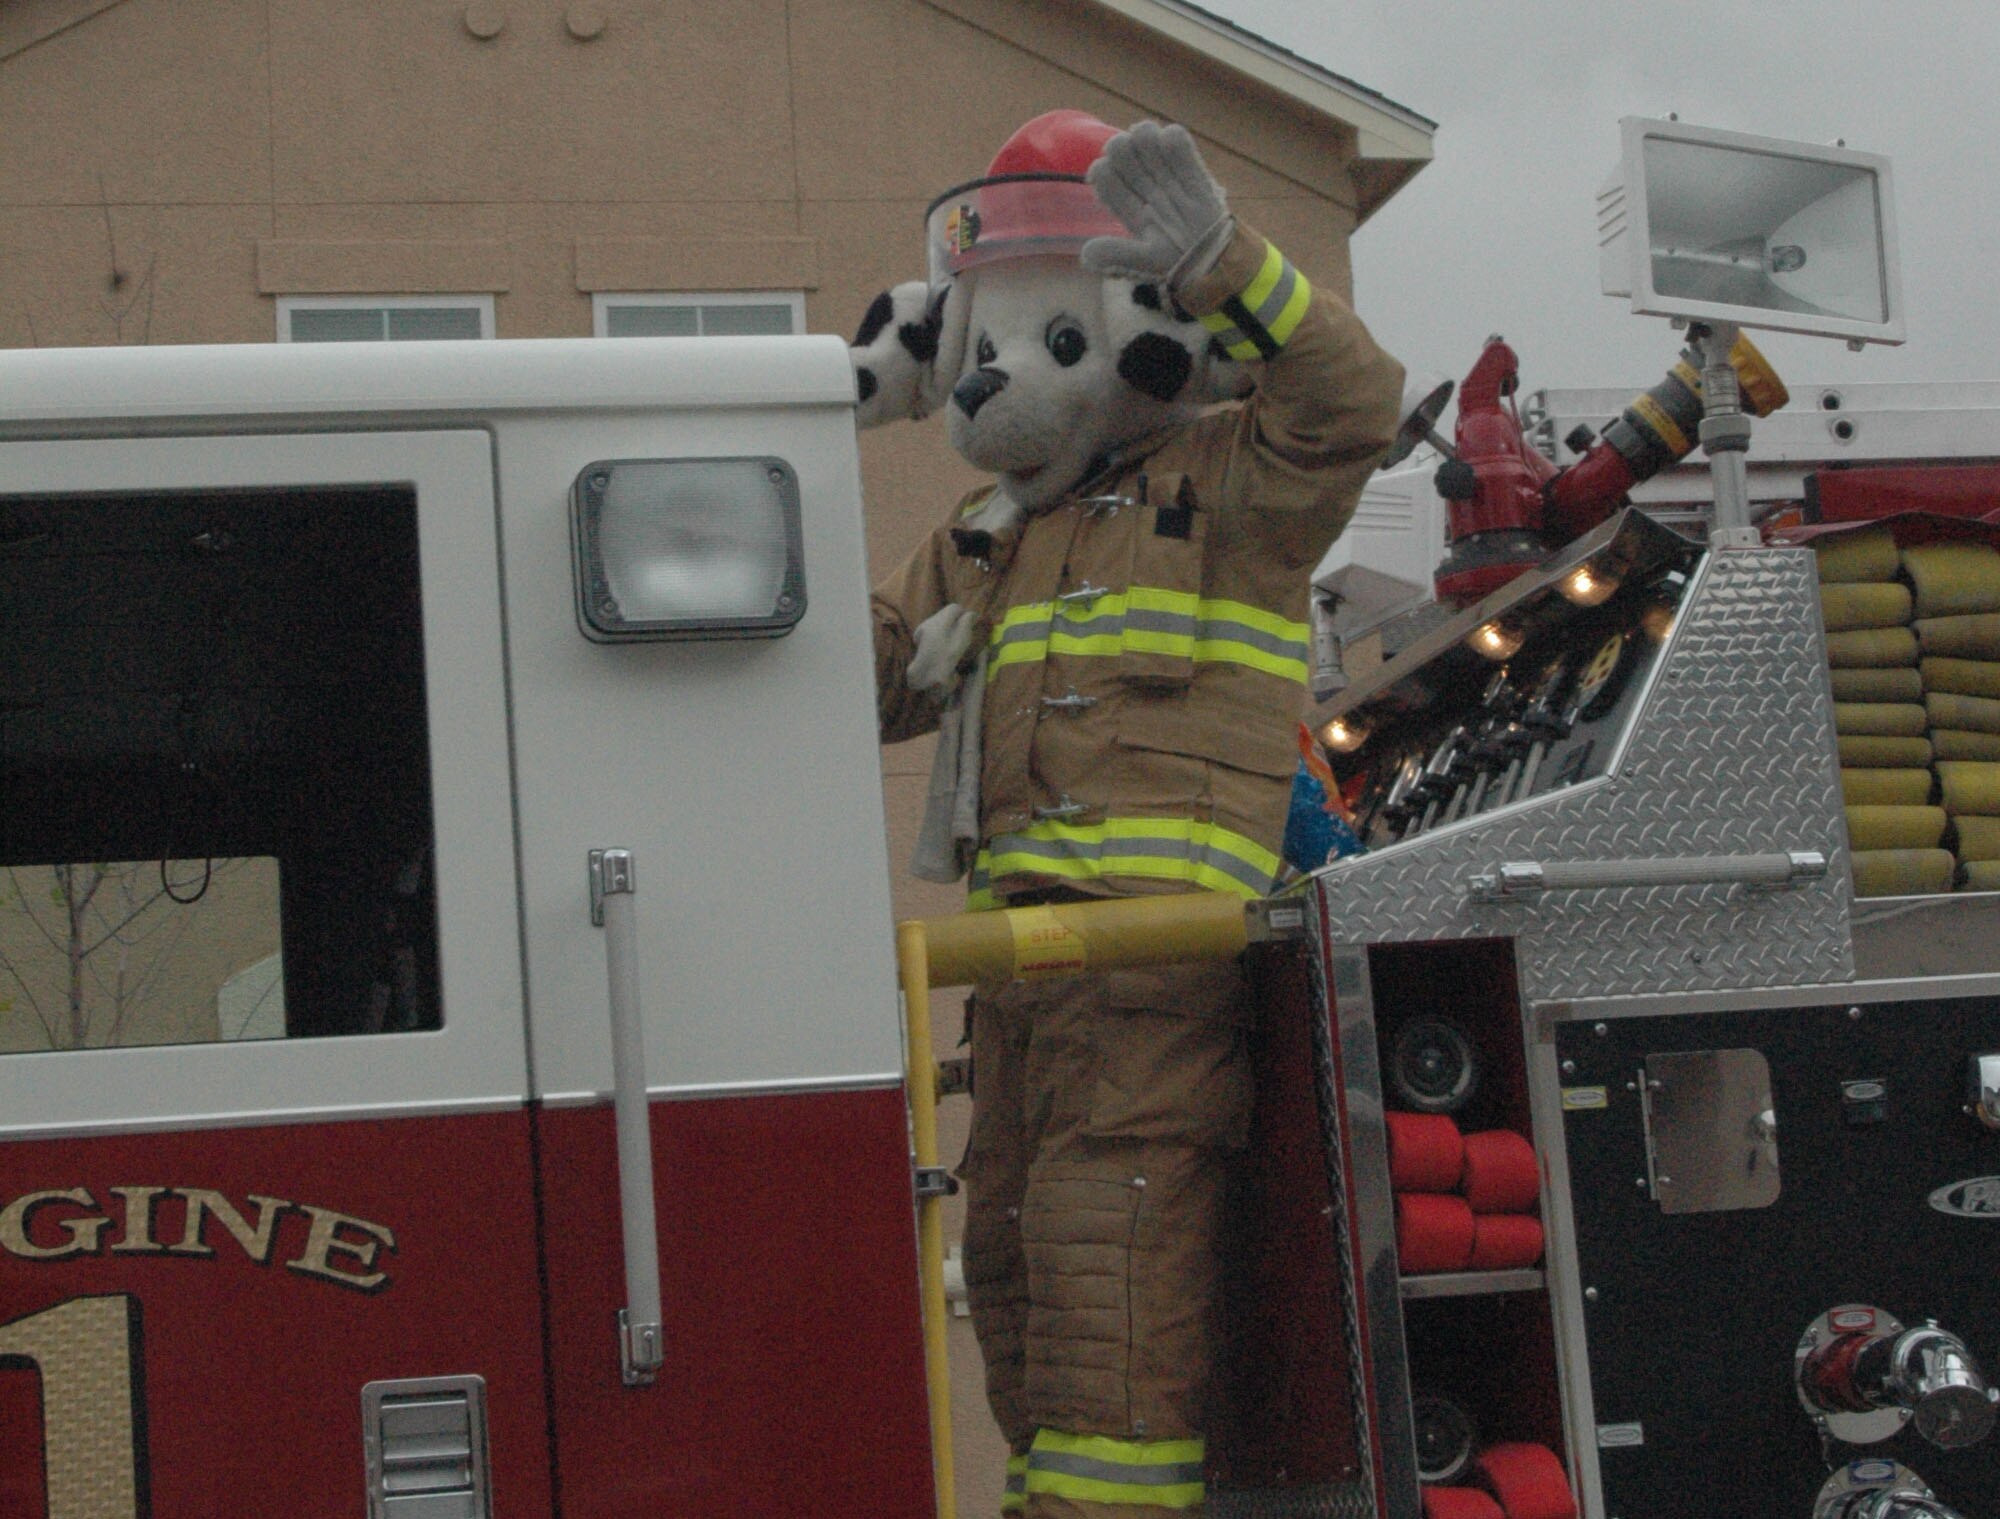 BUCKLEY AIR FORCE BASE, Colo. -- Sparky the Fire Dog waves at Buckley housing residents Oct. 13 during a fire truck parade. The fire department hosted an open house and conducted a fire truck parade through base housing that day to celebrate the ending of fire prevention week. (U.S. Air Force photo by Senior Airman Jacque Lickteig)